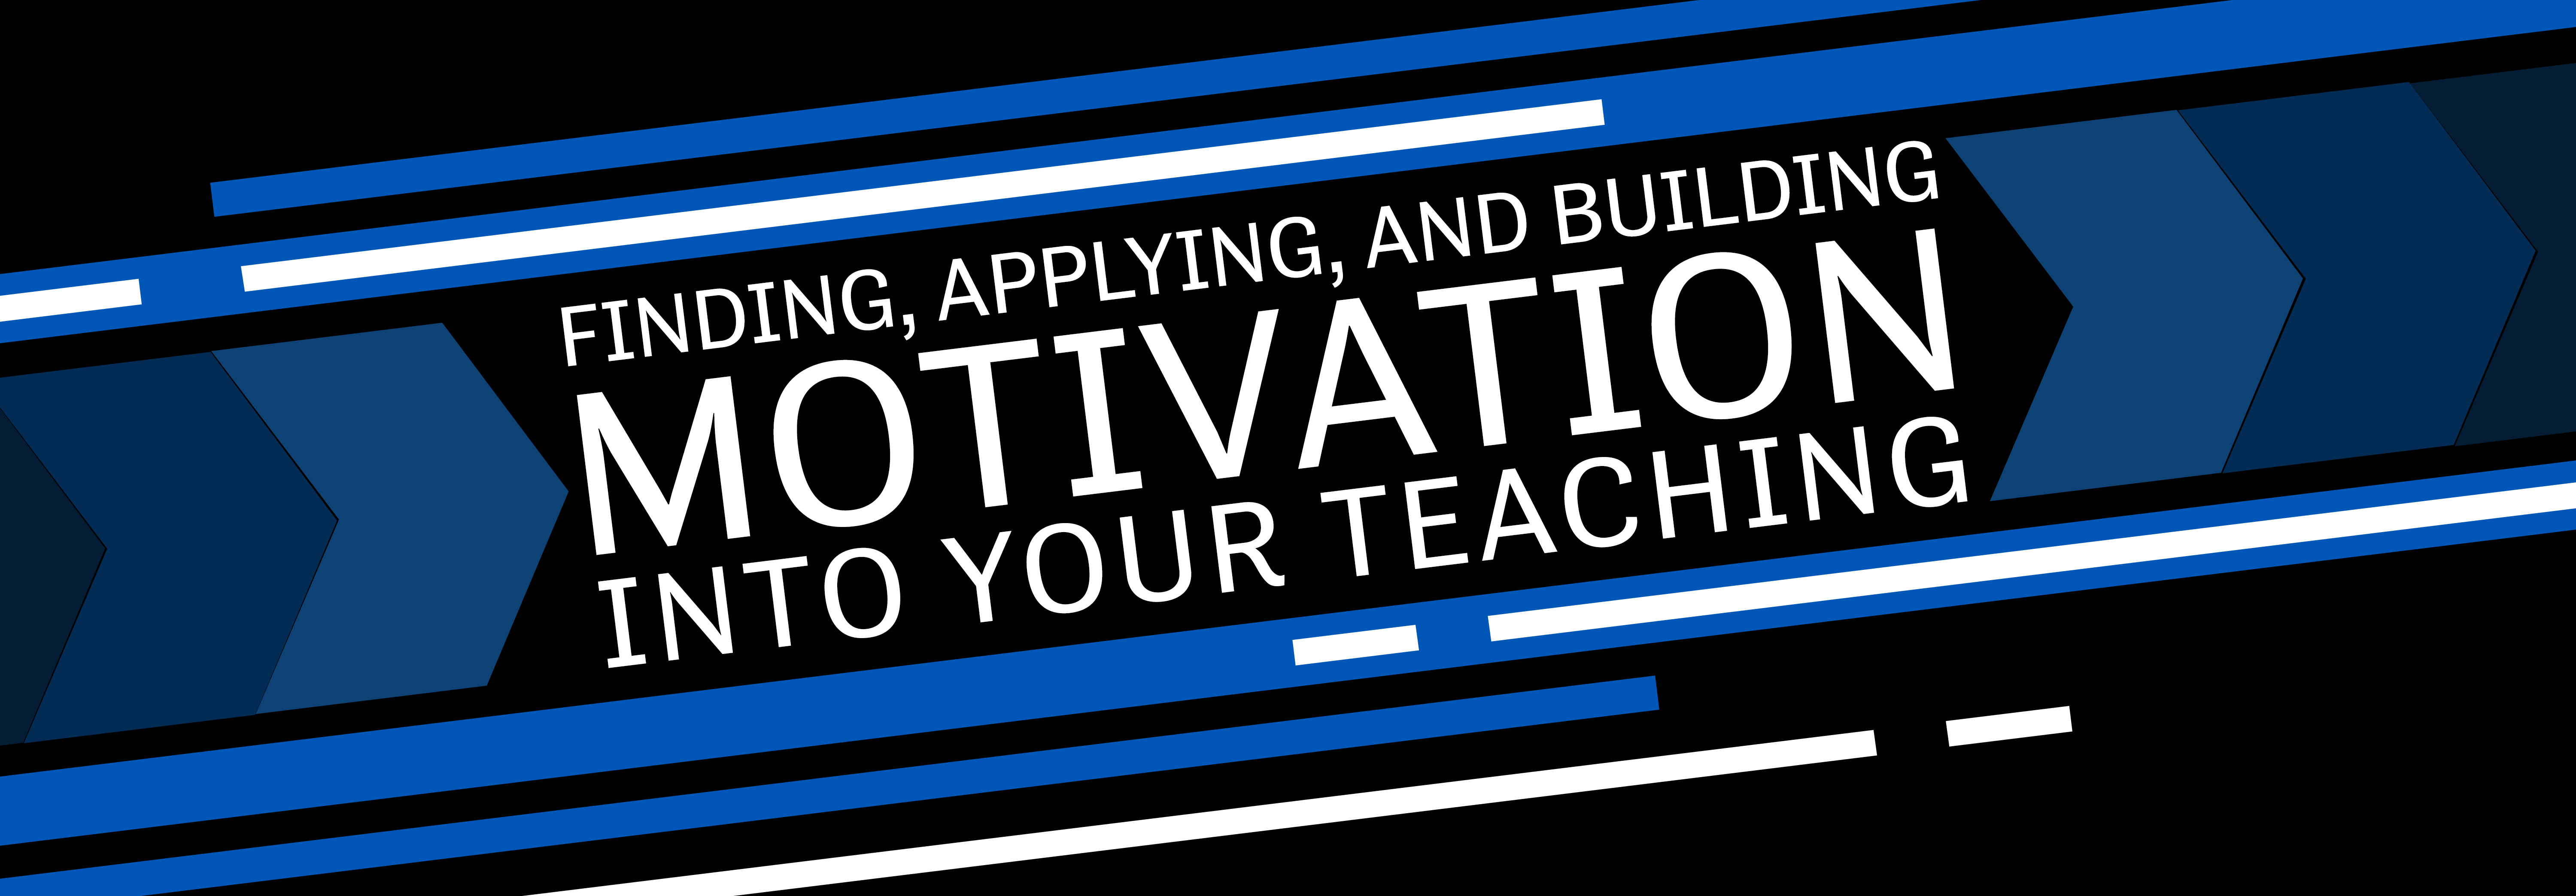 Finding, Applying, and building Motivation into Your Teaching